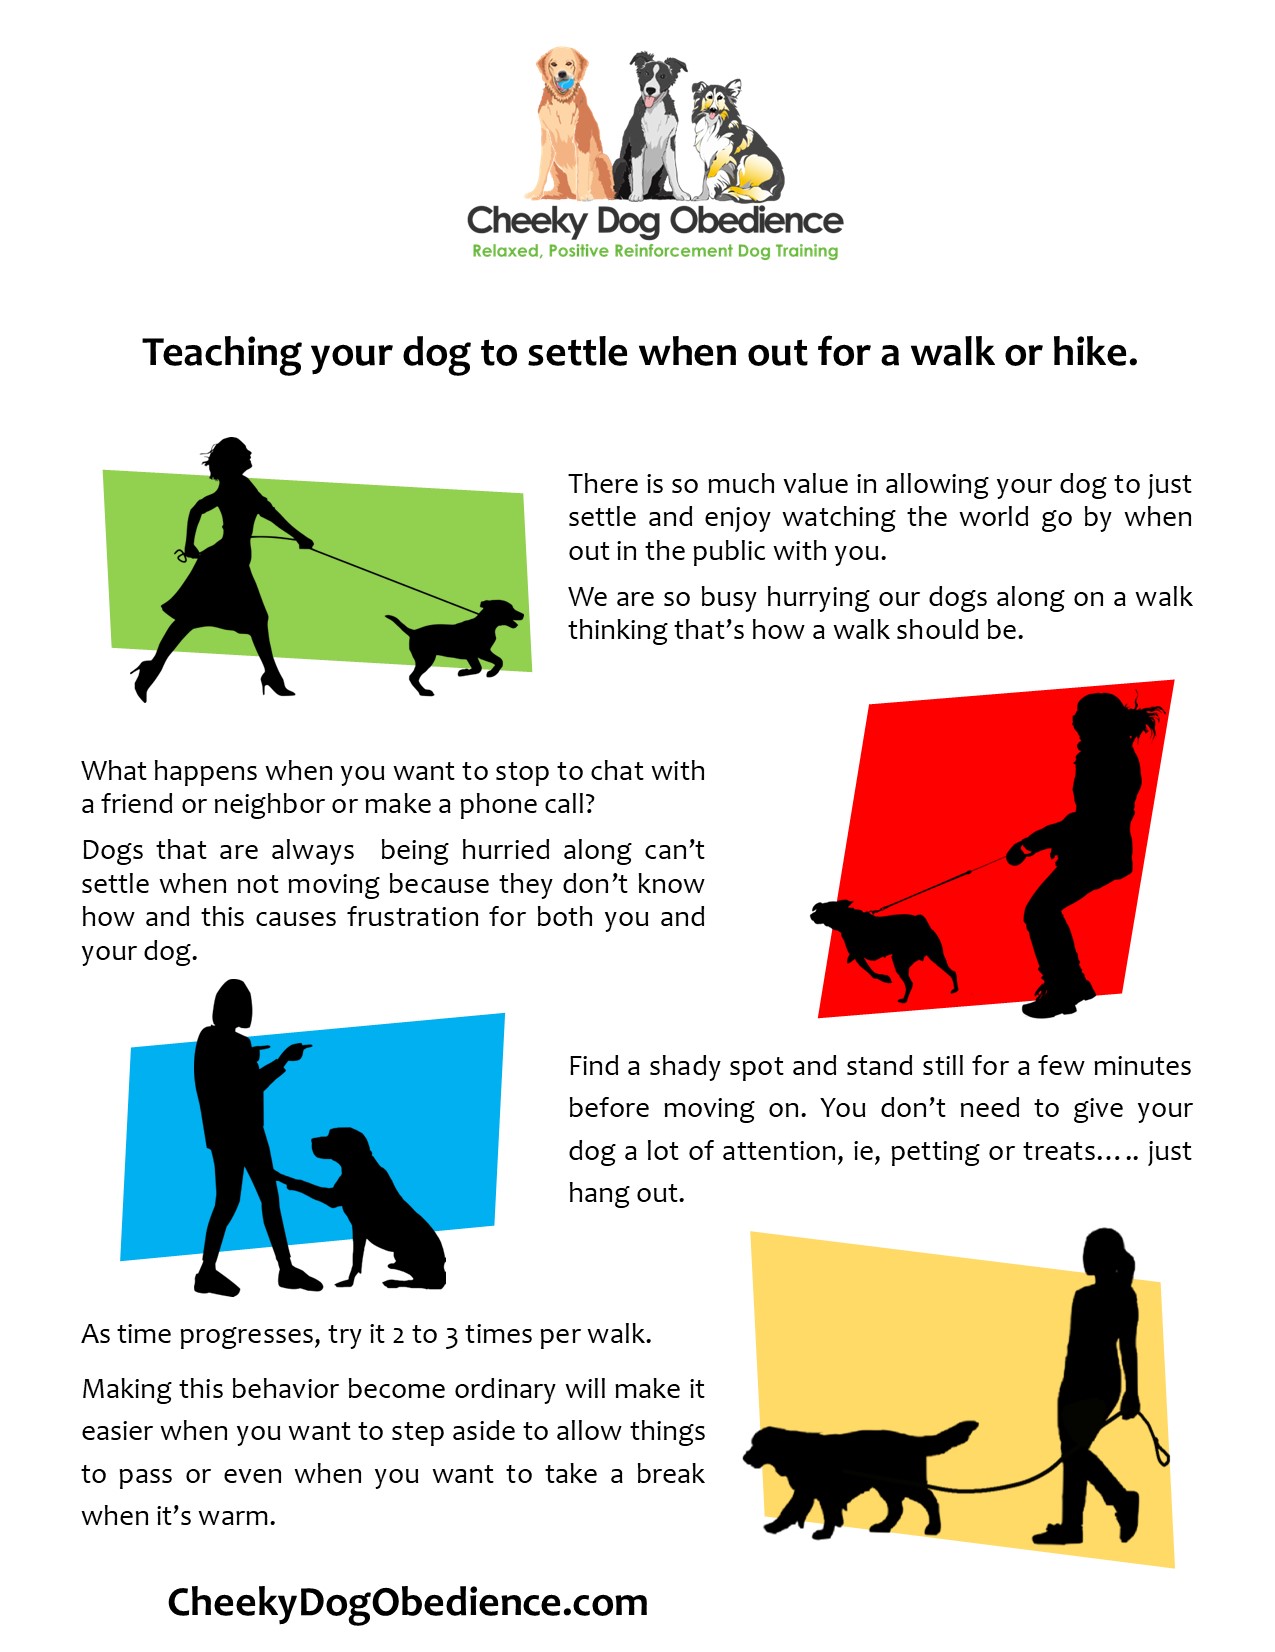 Teaching your dog to settle when walking